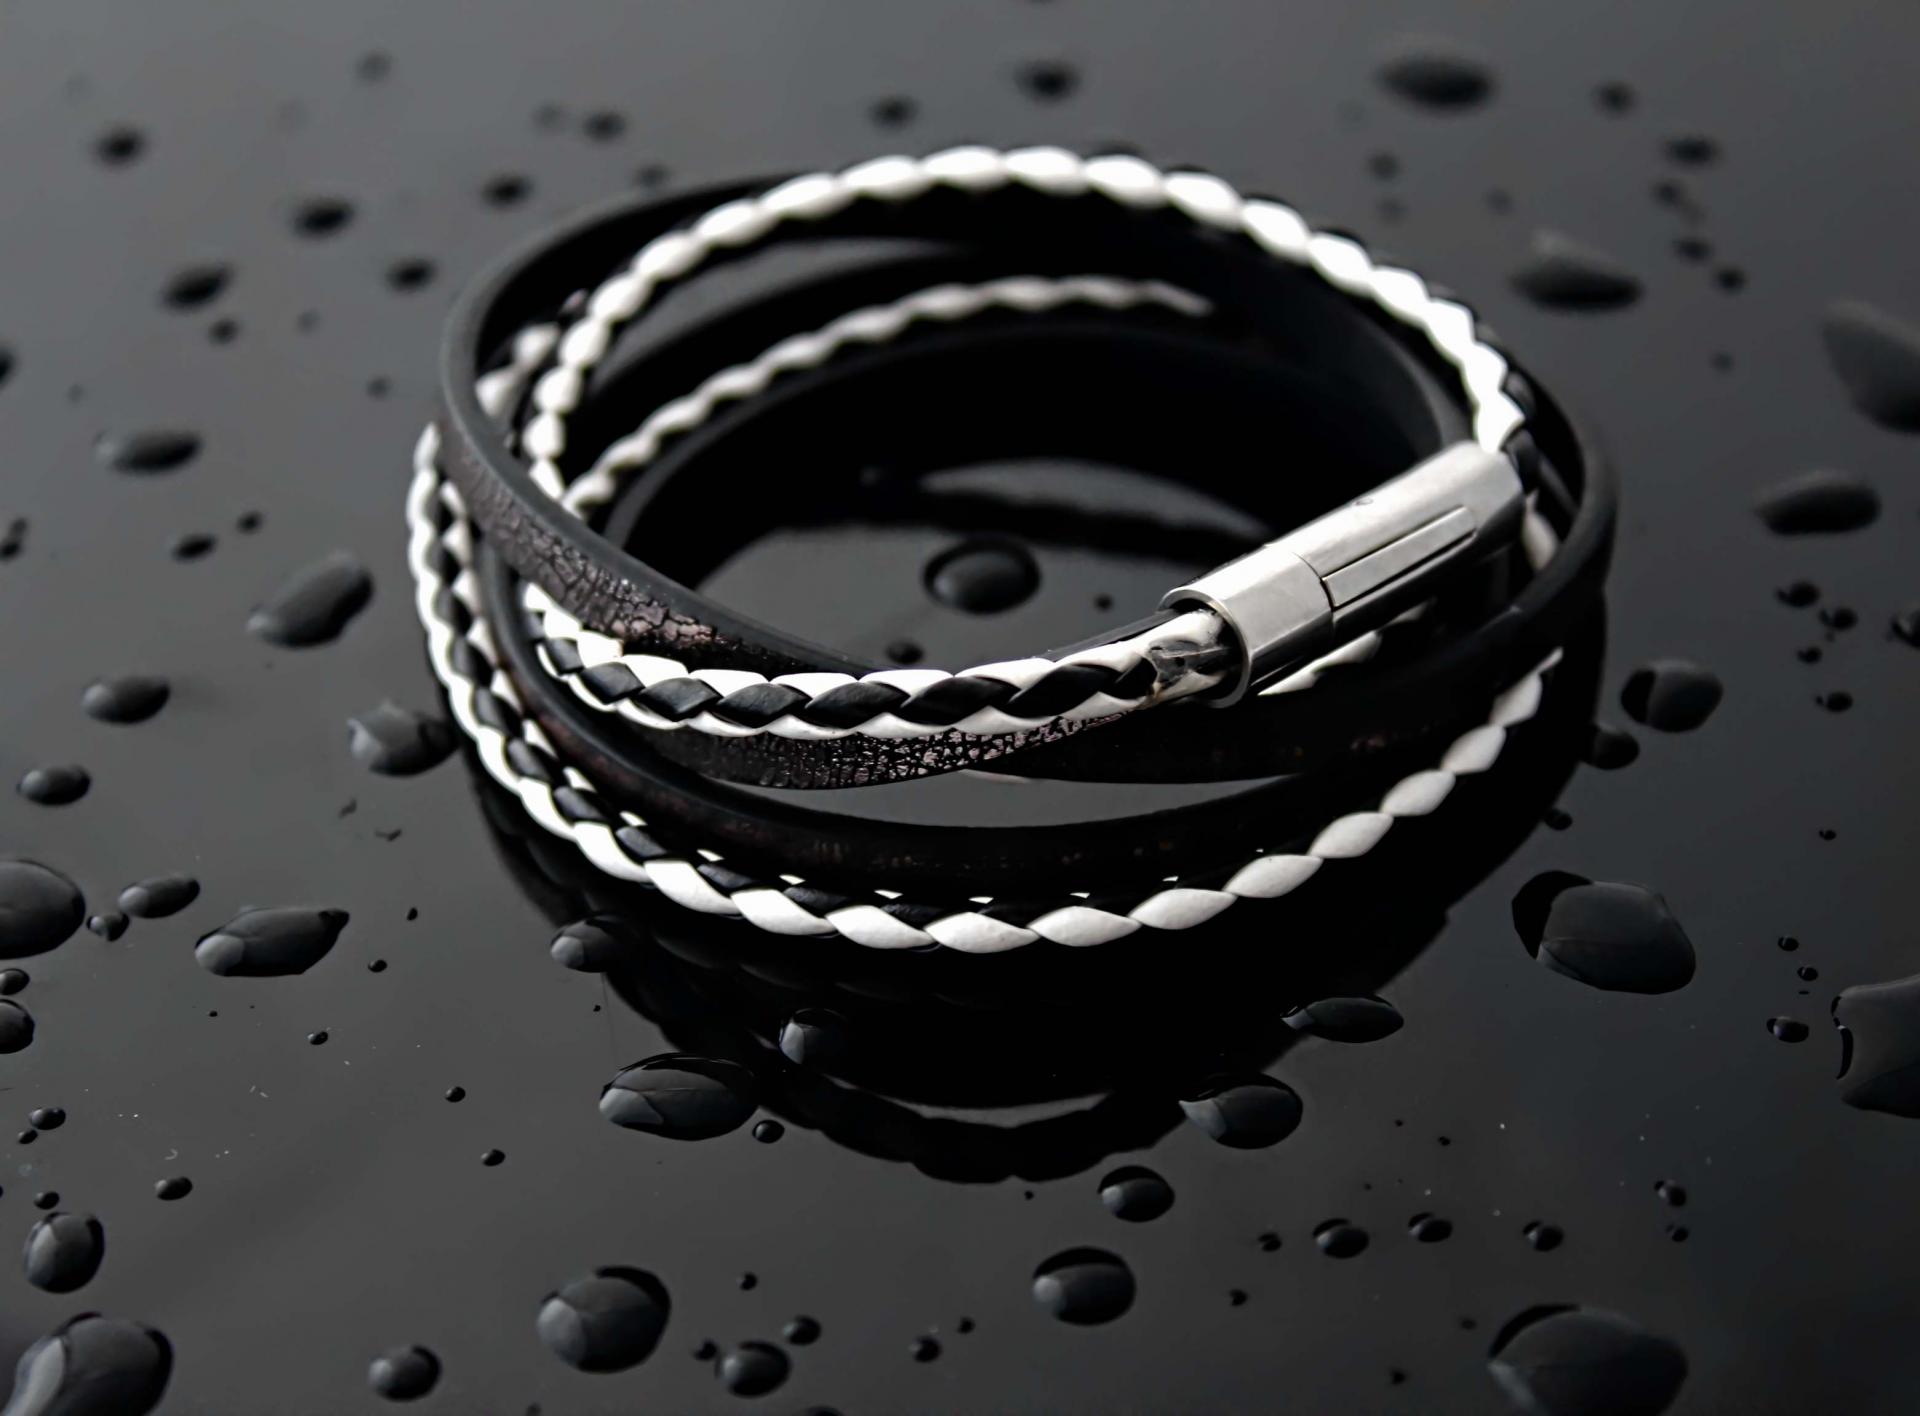 Leather Multiwrap Double Strand Black & White  Bracelet - Crafted To Size